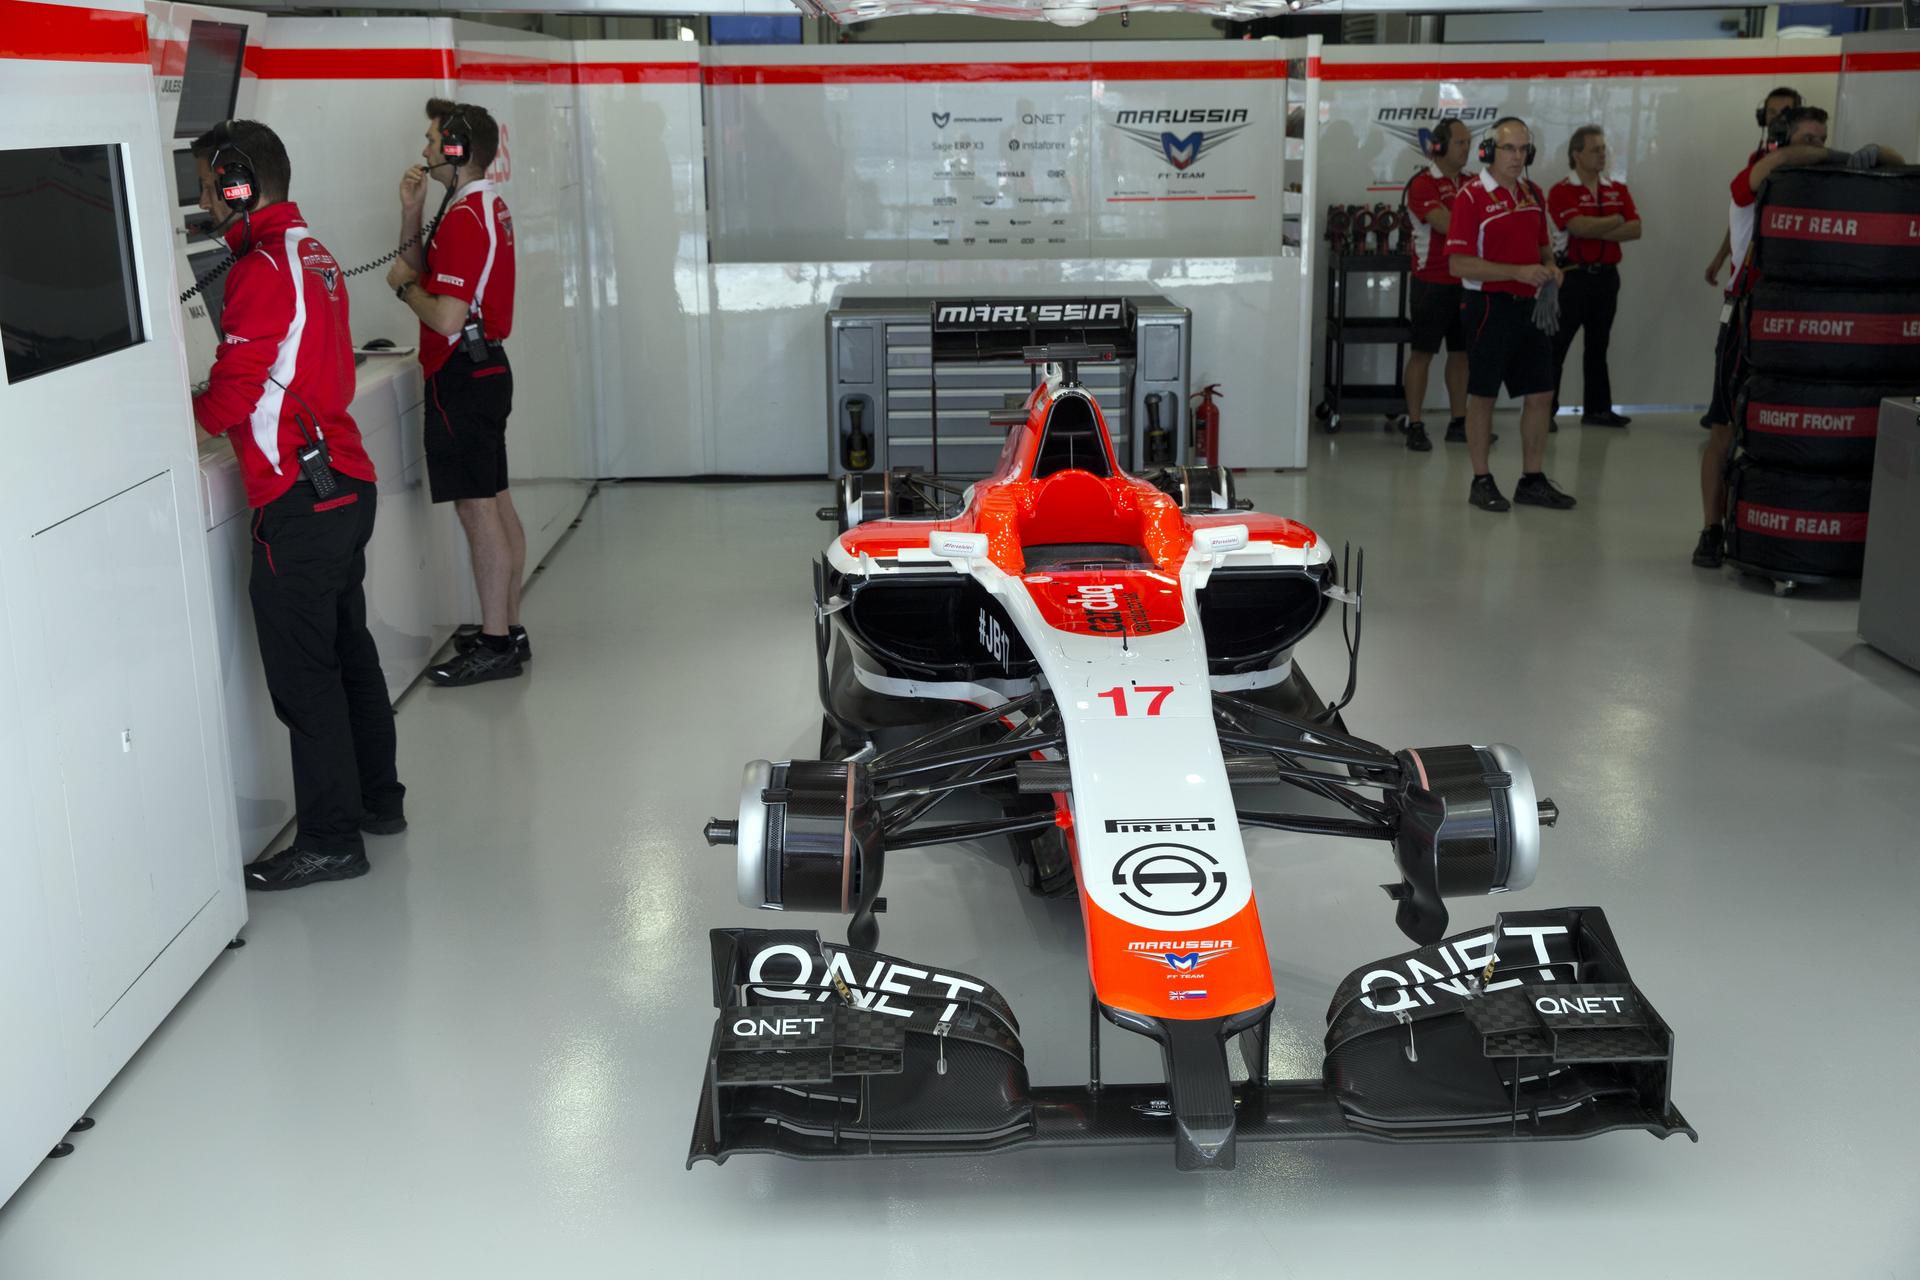 Bianchi's Marussia will remain in the pits this weekend. Photos: AP